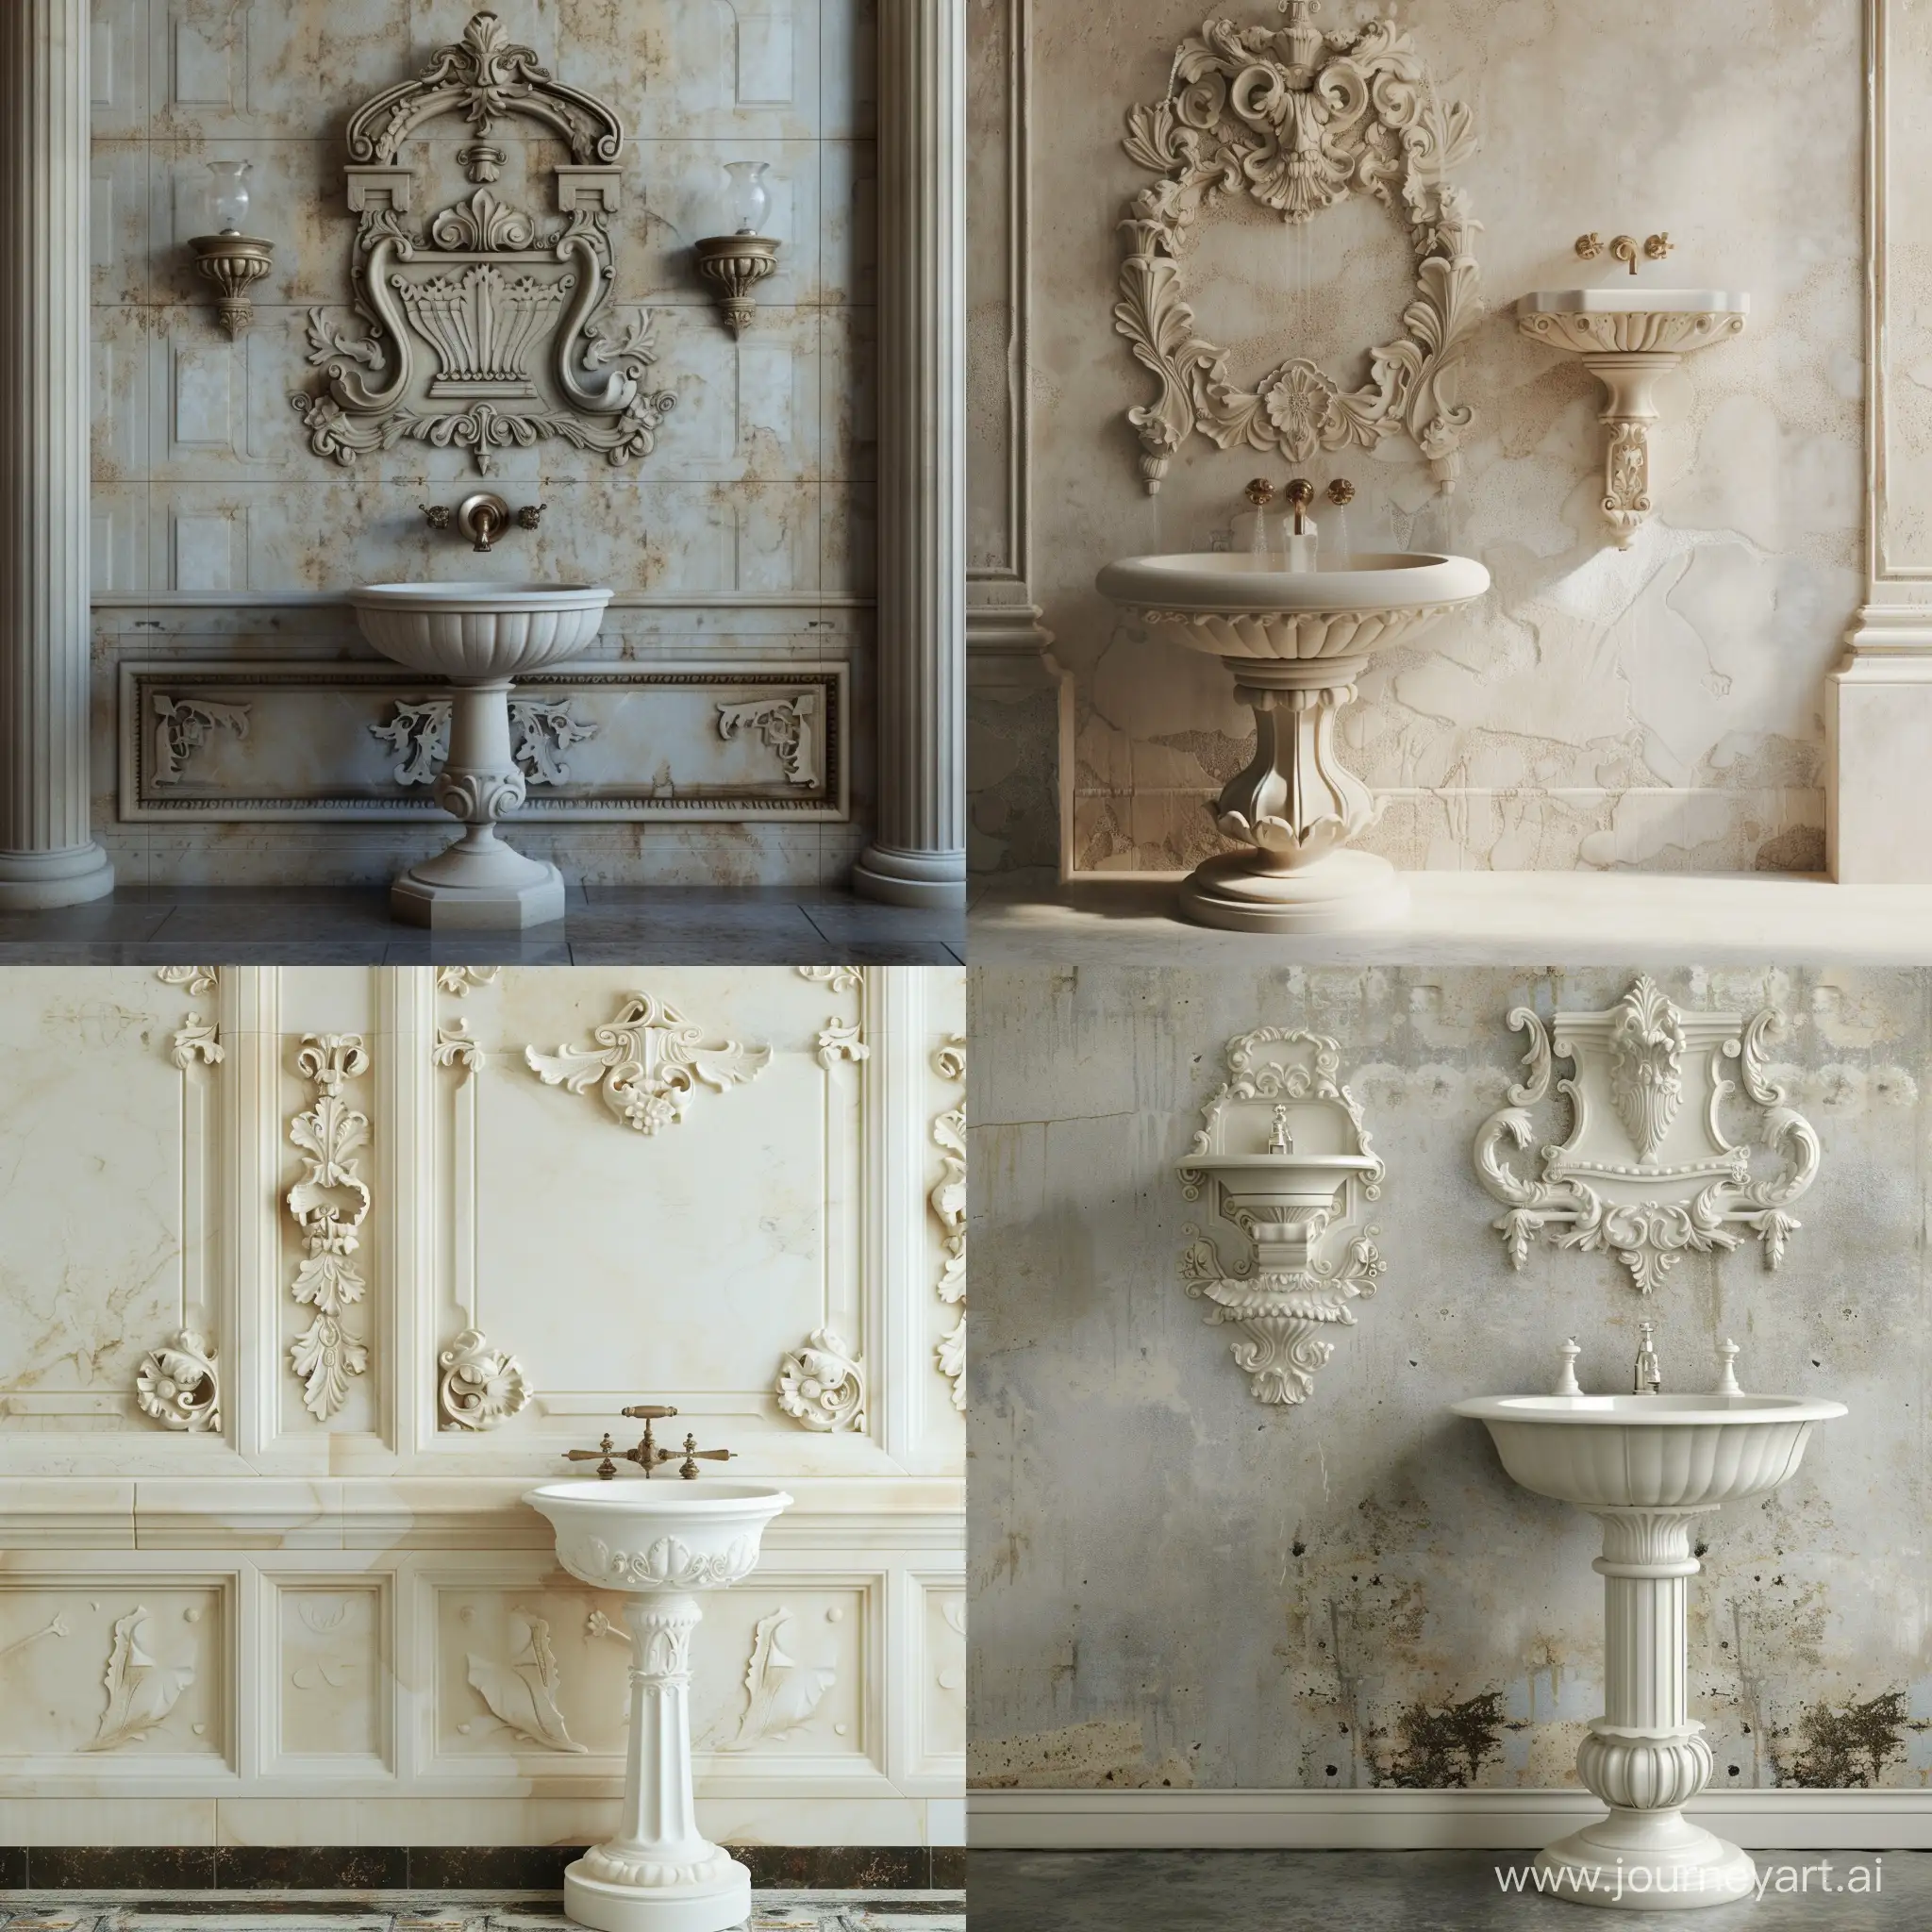 Baroque-Architecture-Fountain-with-Pedestal-Sink